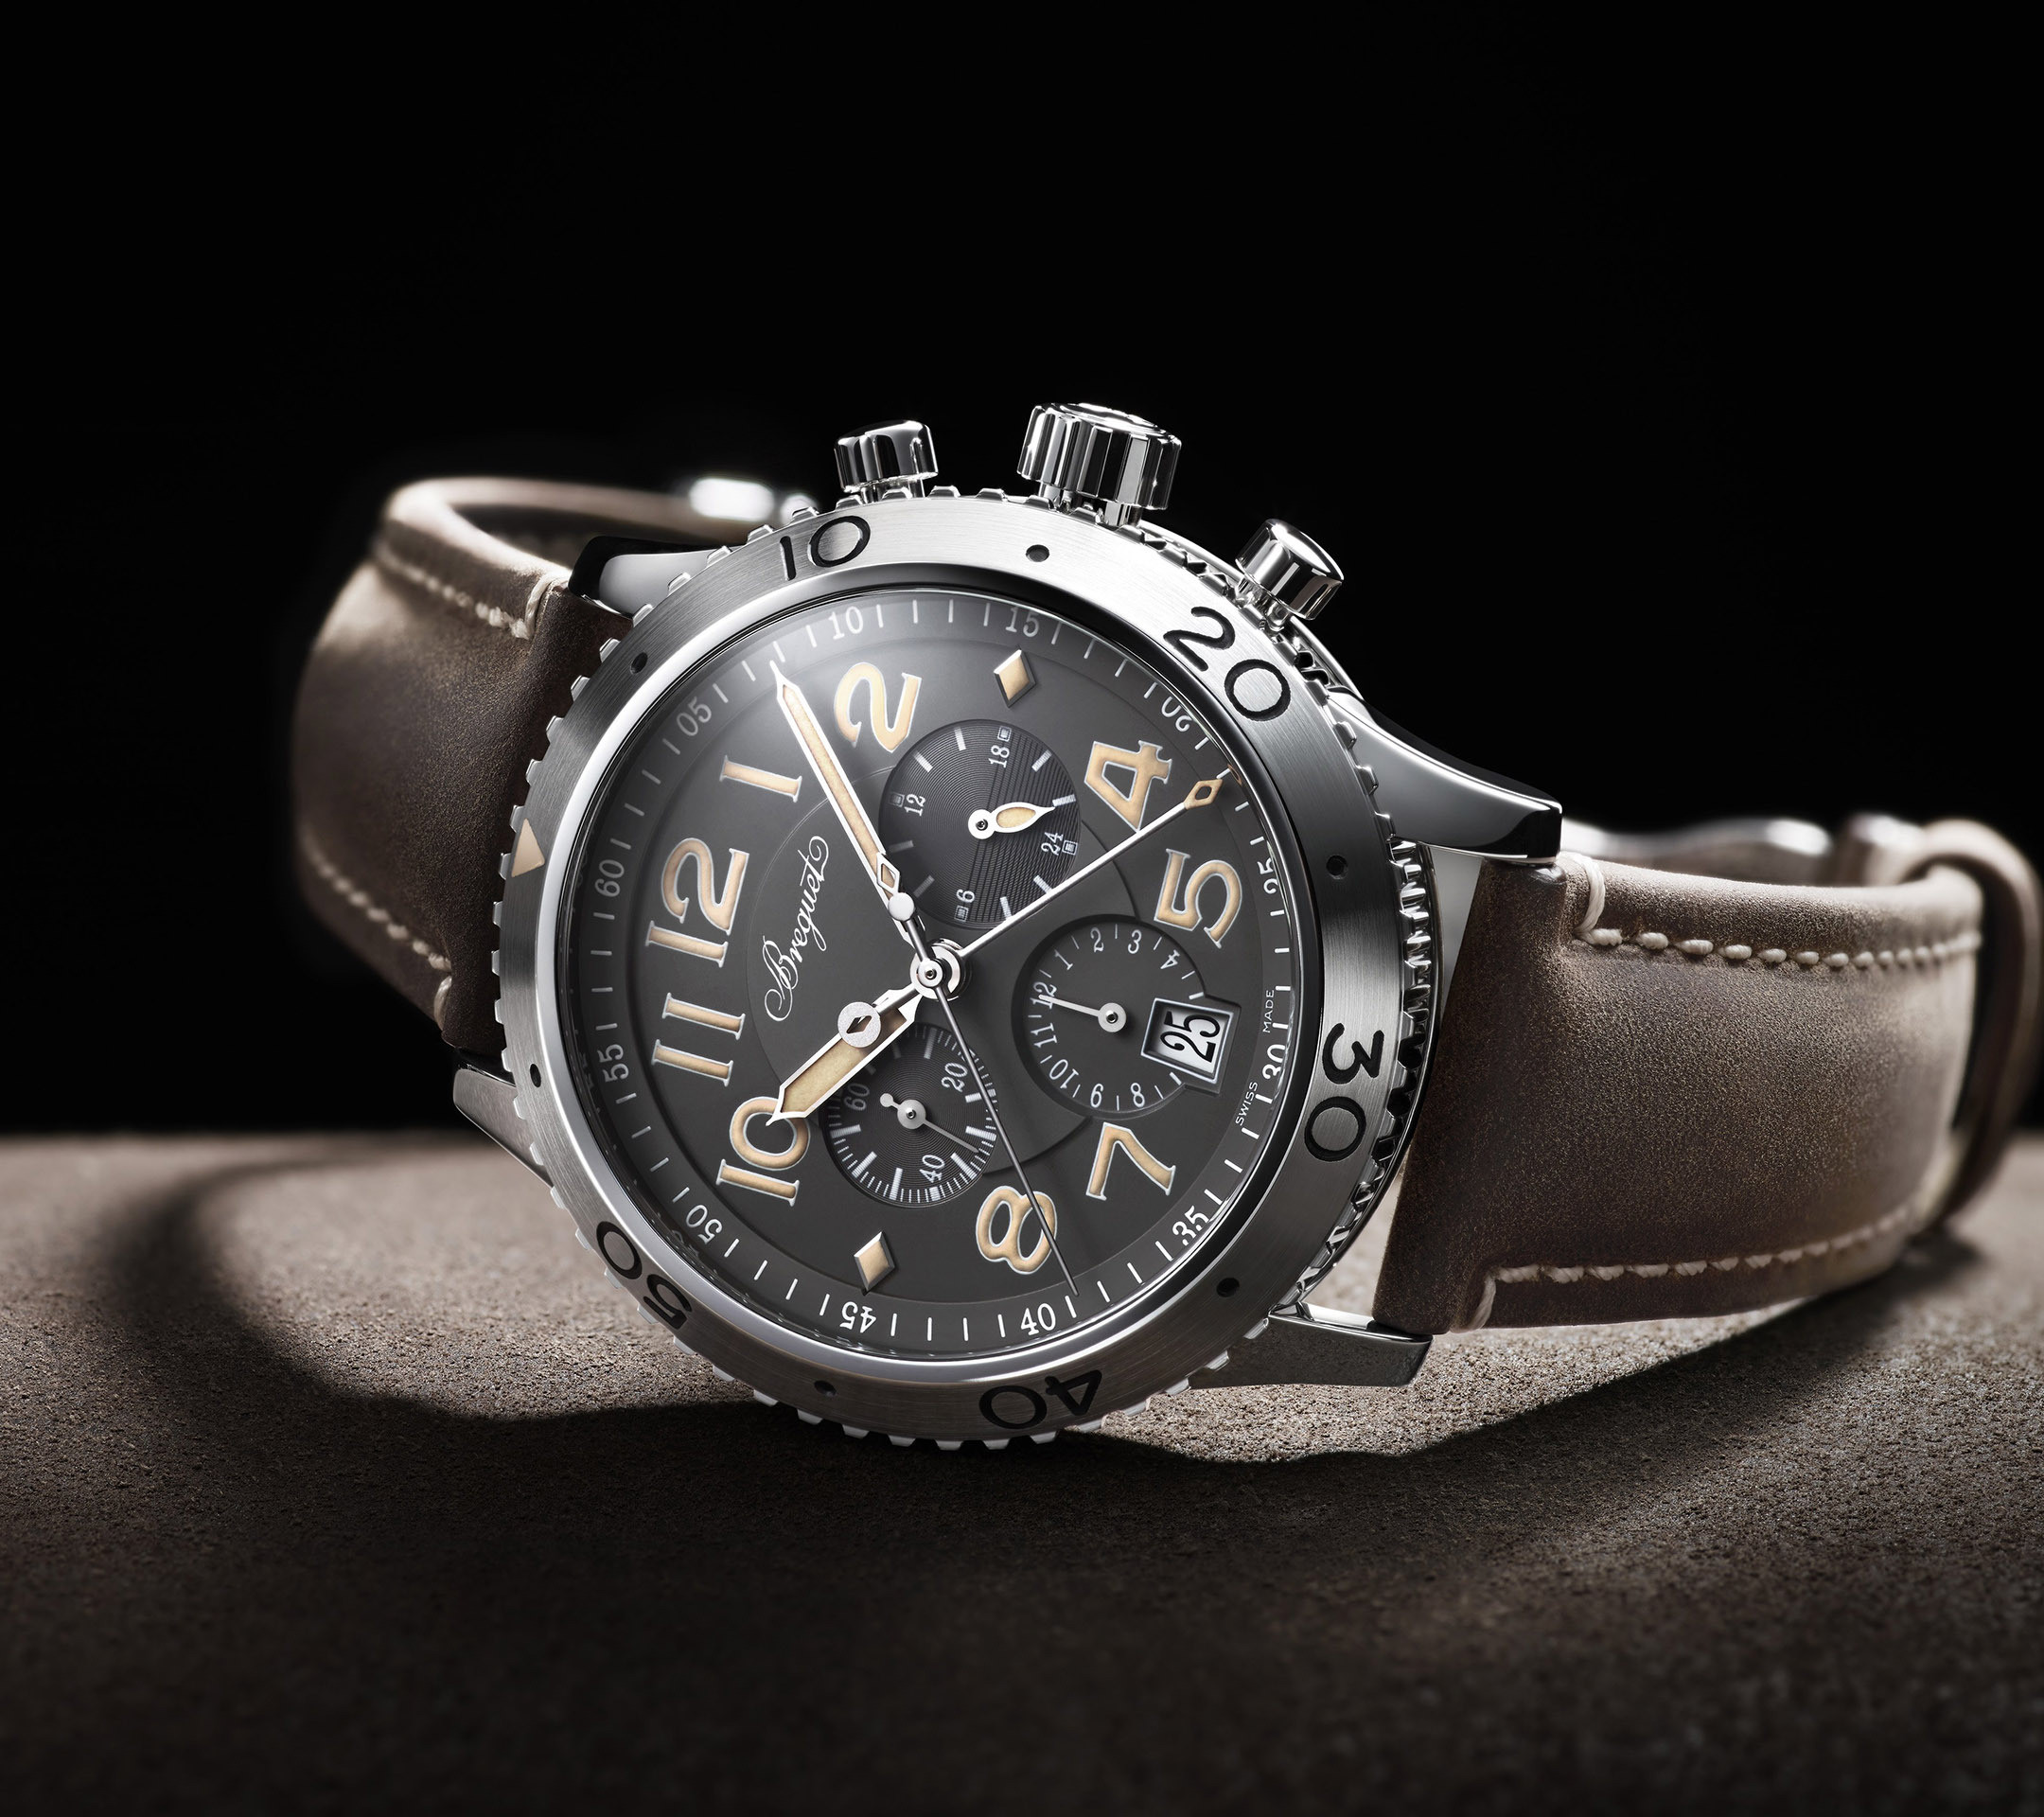 Breguet watch with brown leather strap Wallpaper